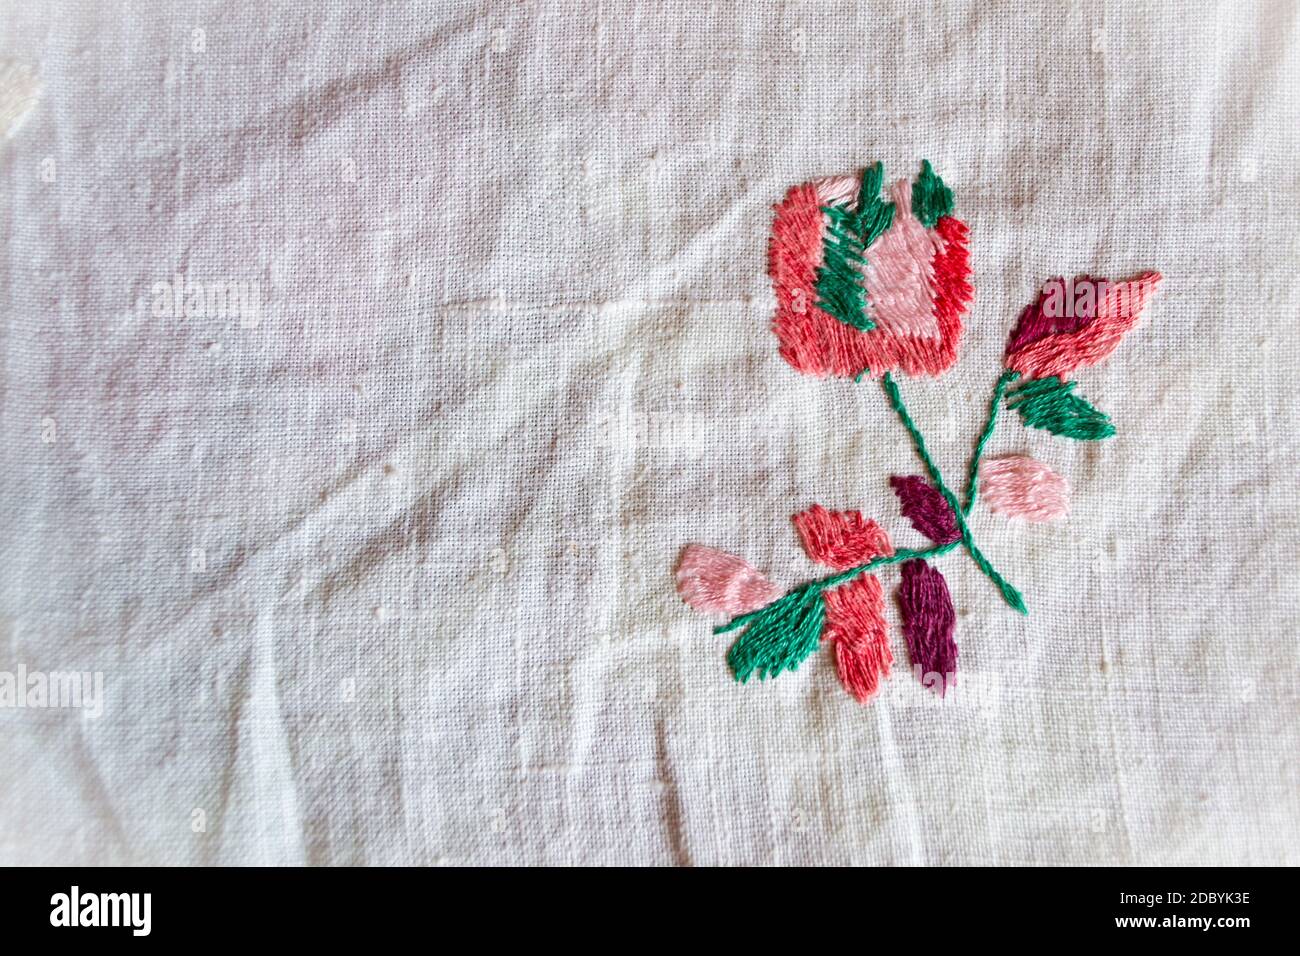 Fragment Of Fabric With Traditional Handmade Wooden Cross Stitch